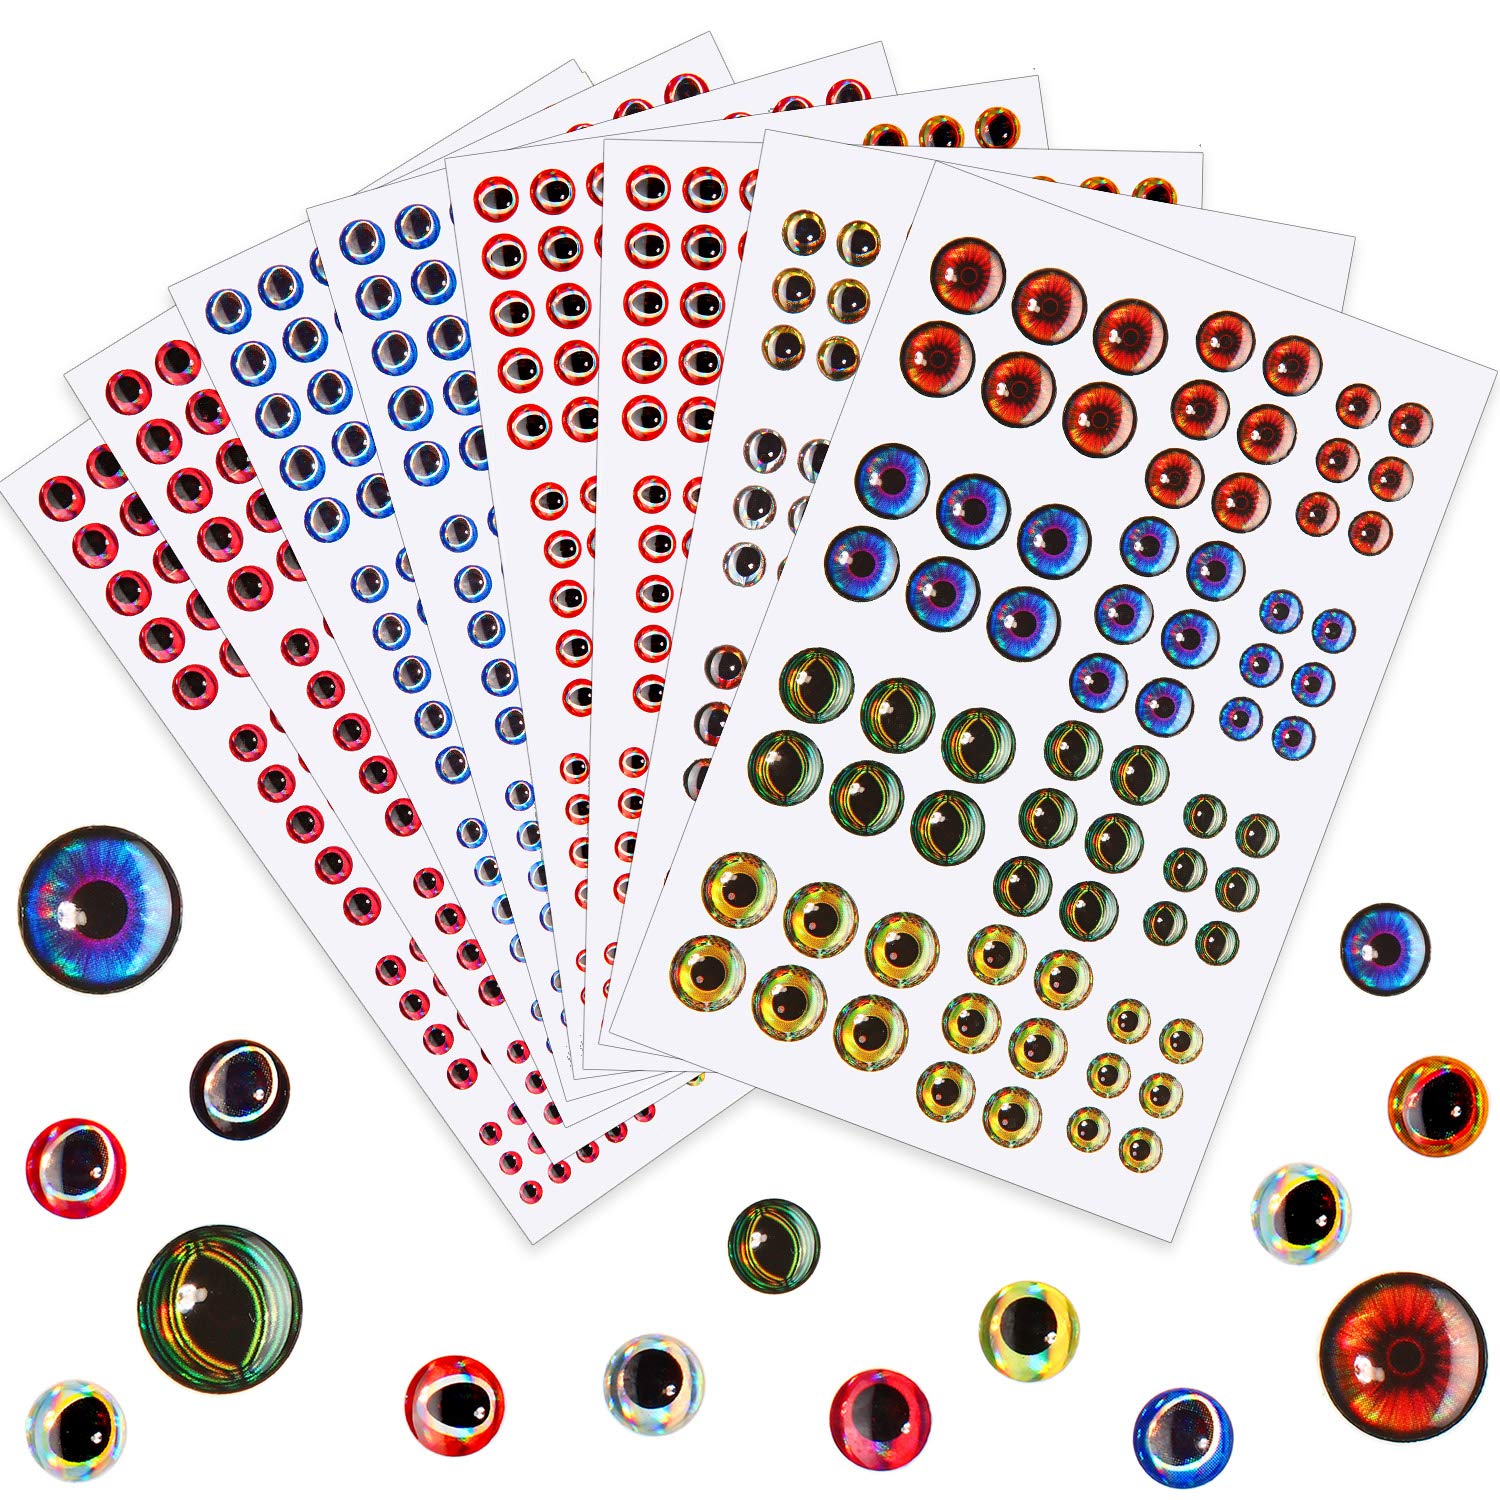 YUAAO 1242 Pieces 3D 4D Fishing Eyes Oval Fishing Lure Eyes Realistic  Fishing Eye for Making Fishing Bait Fly Tying Streamers Lures Crafts 6  Sizes: 3mm/ 4mm/ 5mm/ 6mm/ 8mm/ 10mm (Multicolor-1242 Pcs)